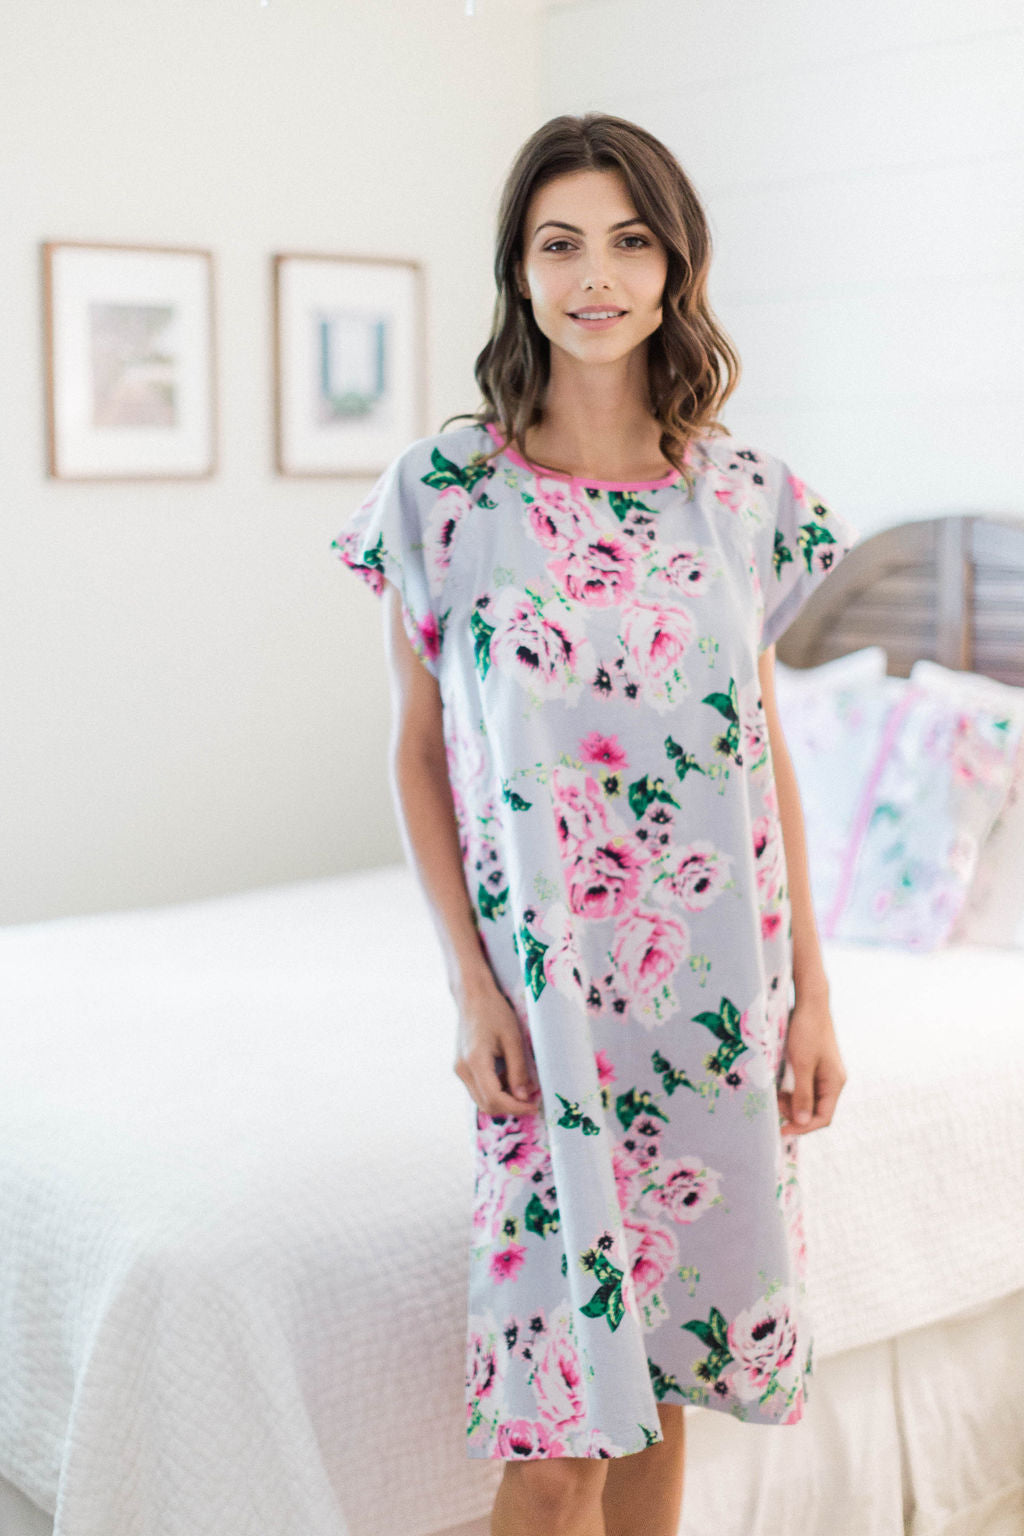 Olivia Patient Hospital Gown Gownies